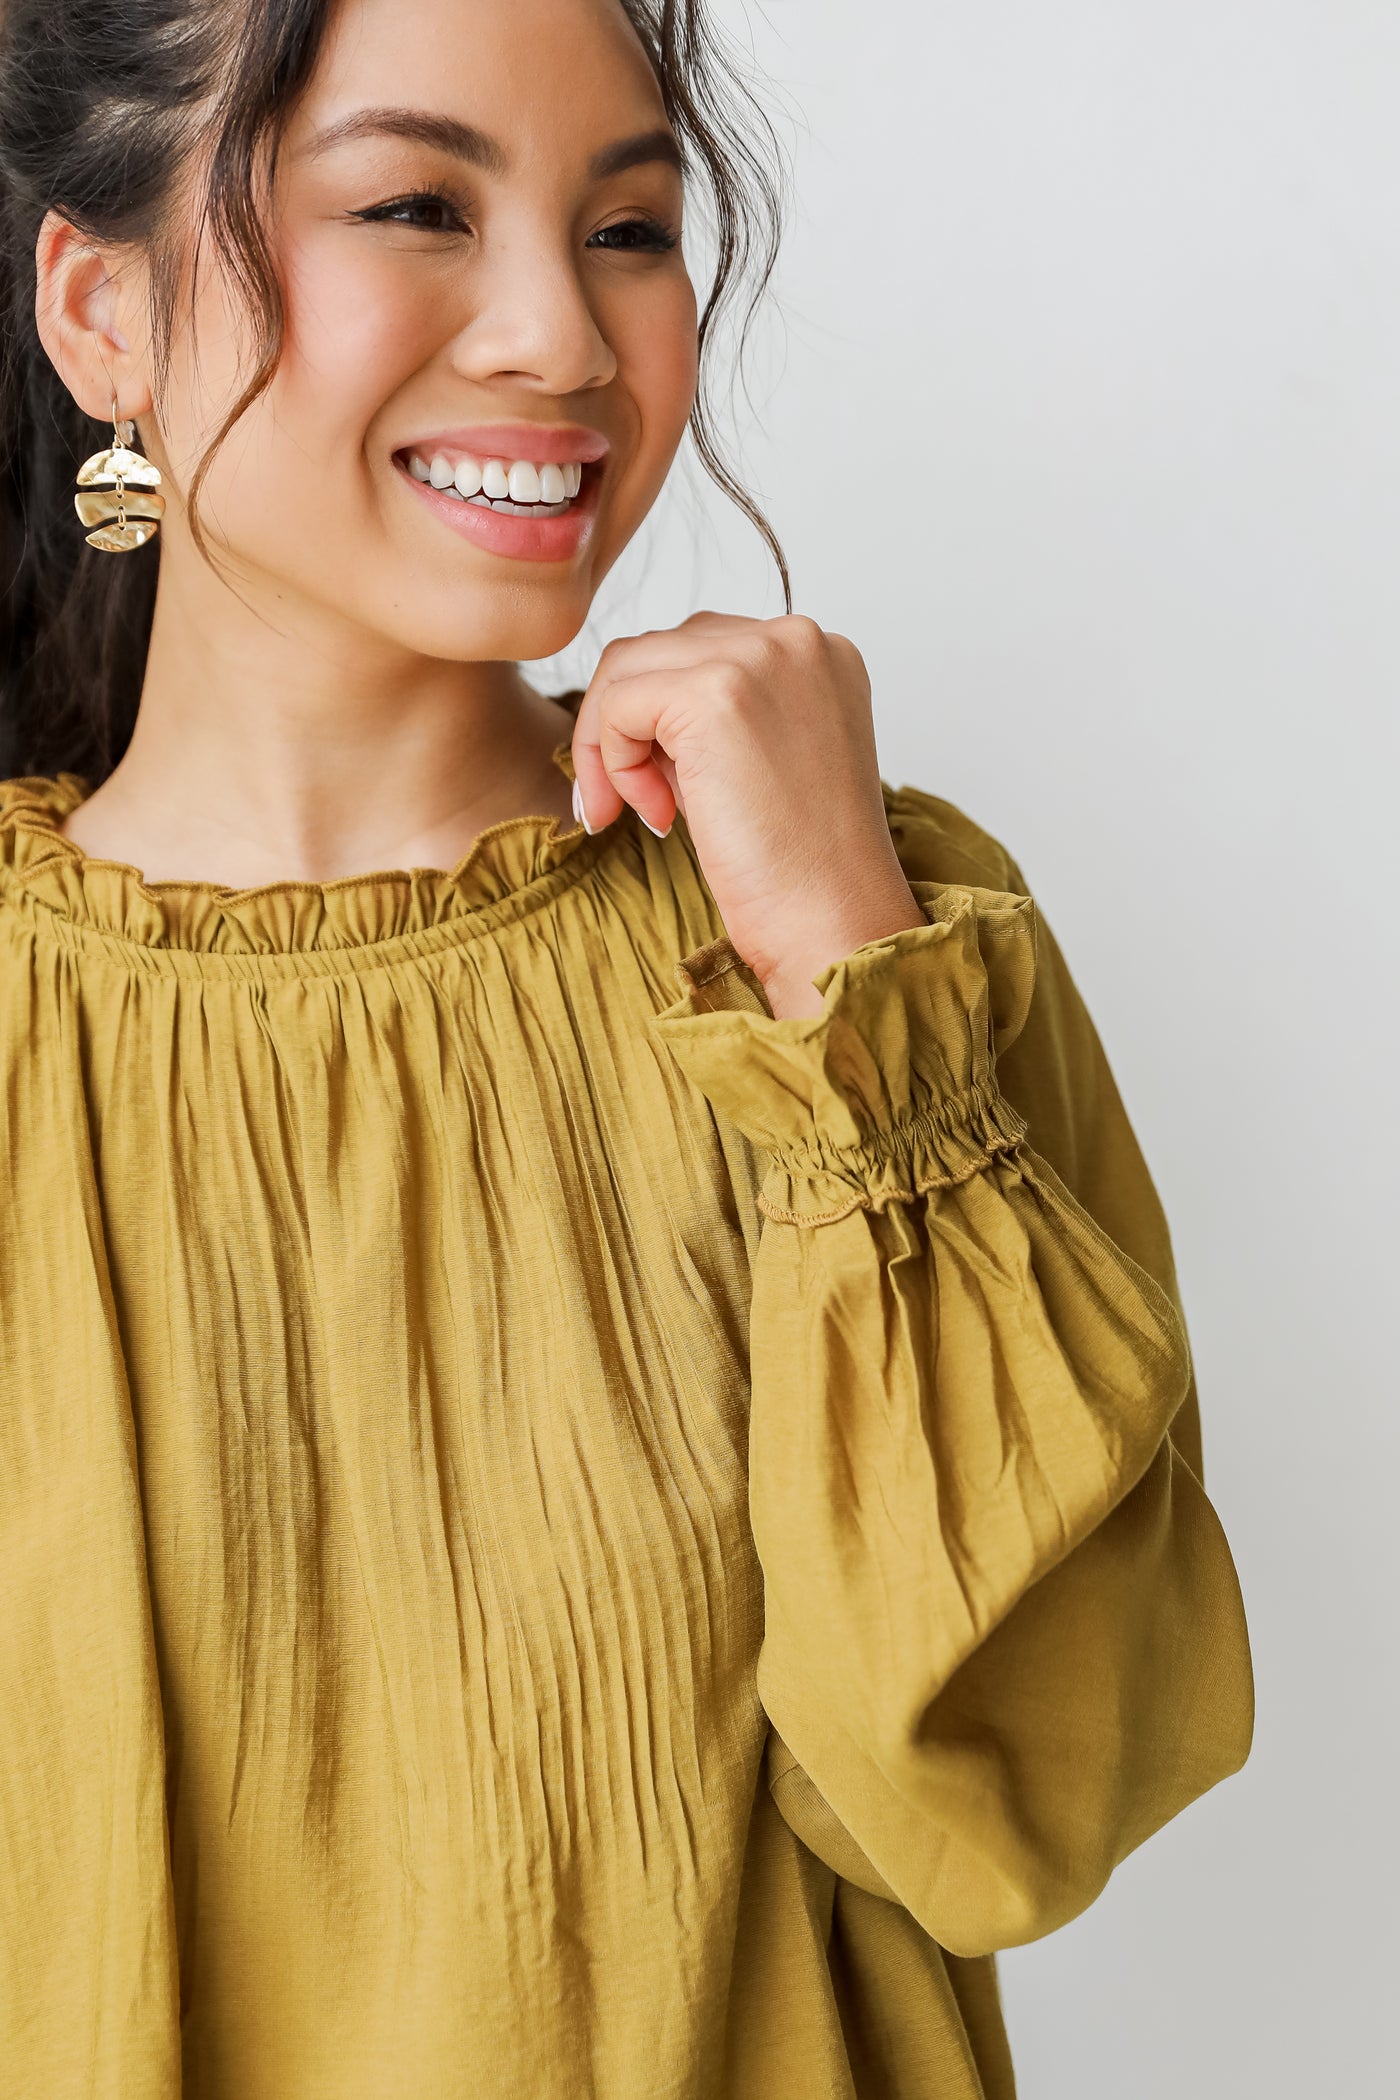 Blouse in mustard close up